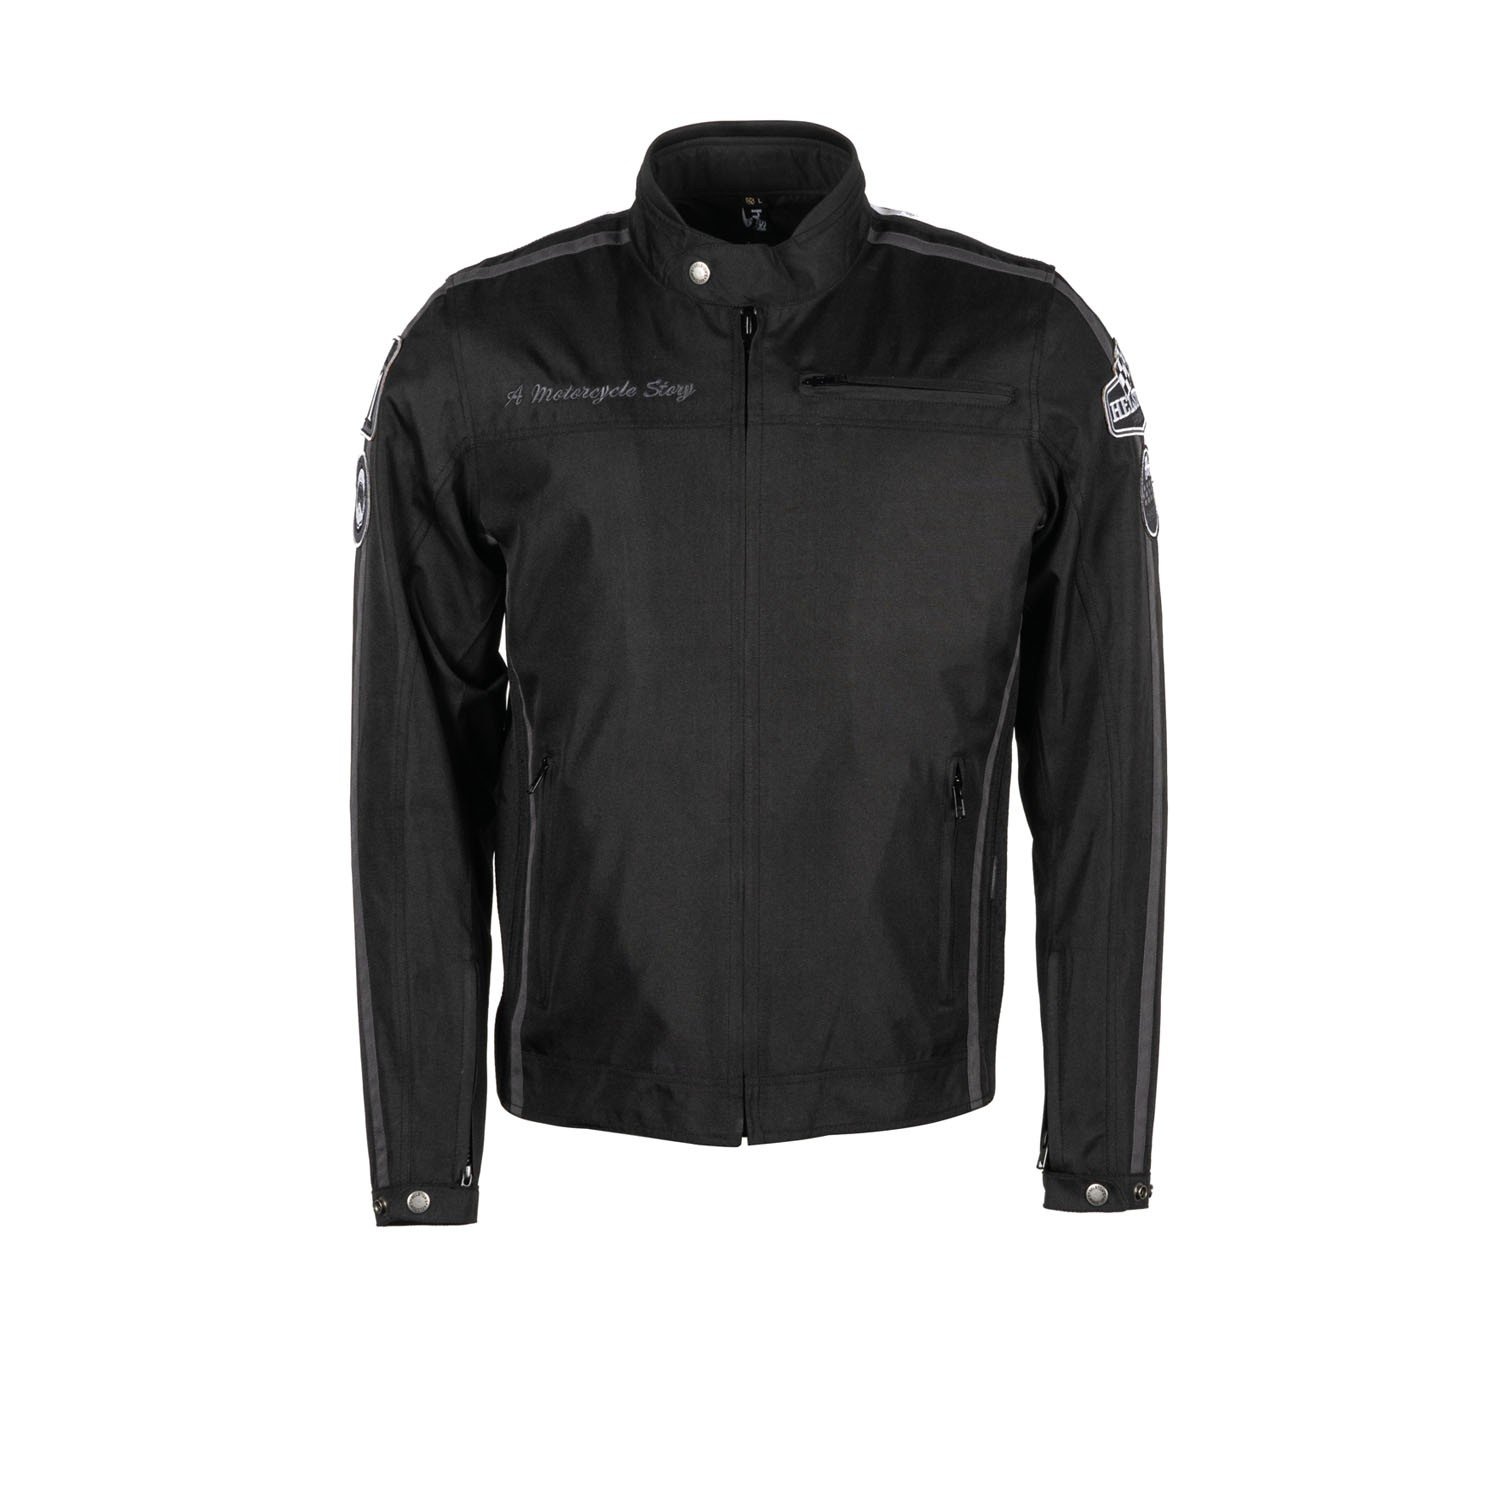 Image of Helstons King Tissu Technique Jacket Black Size S ID 3662136083813